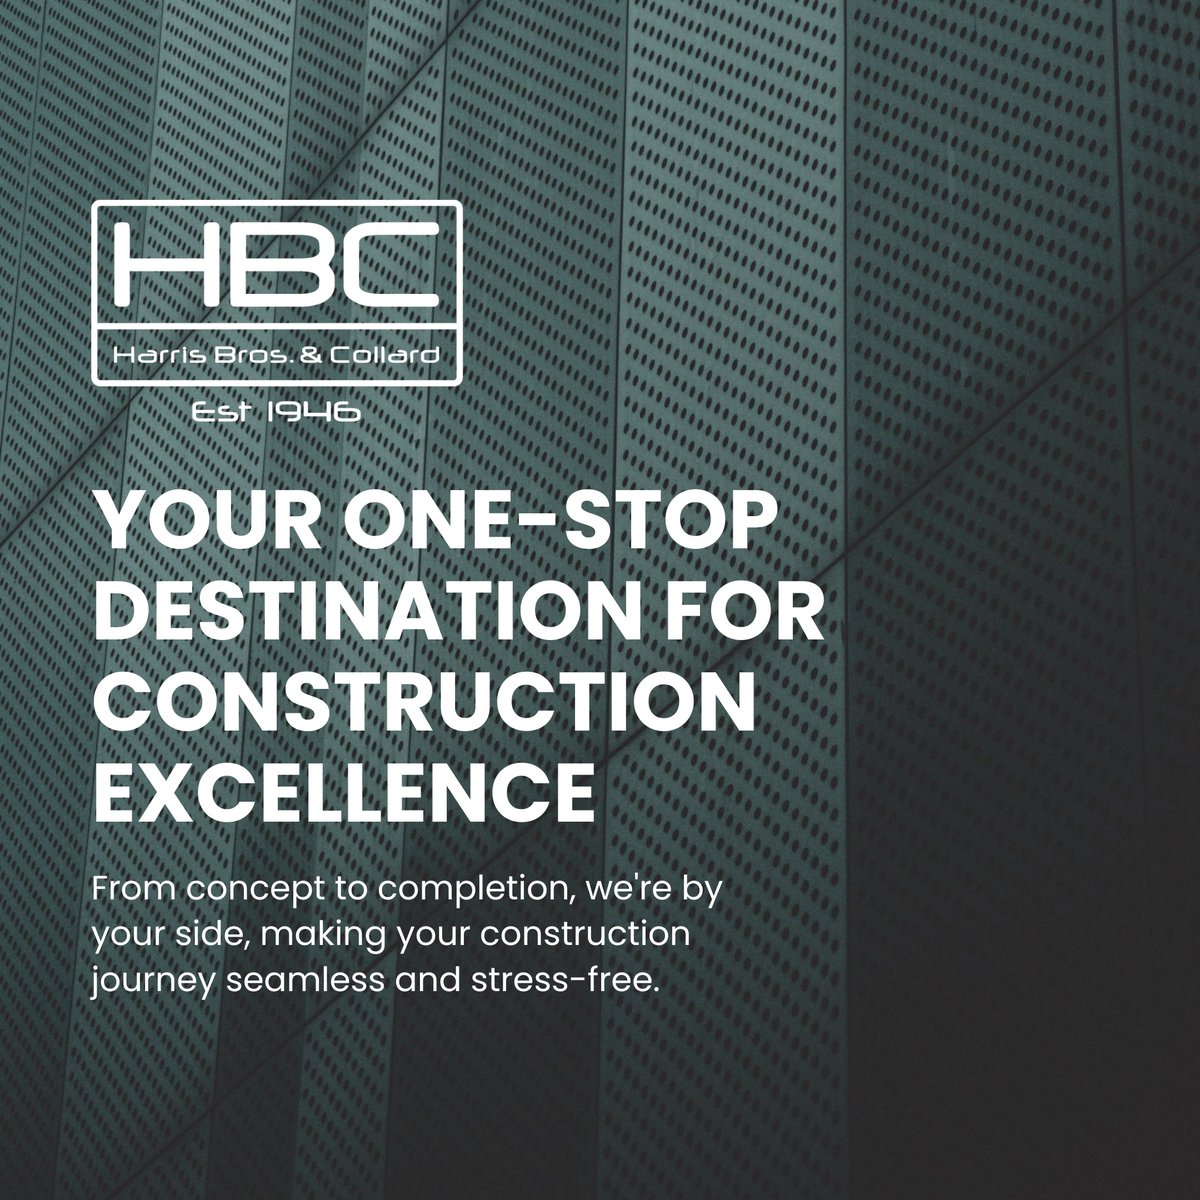 We are your one-stop destination for construction excellence 🏢

👷So what sets us apart? At Harris Bros and Collard, we are a forward thinking company that takes pride in our turnkey approach 🔑

#ConstructionExcellence #TurnKeySolutions